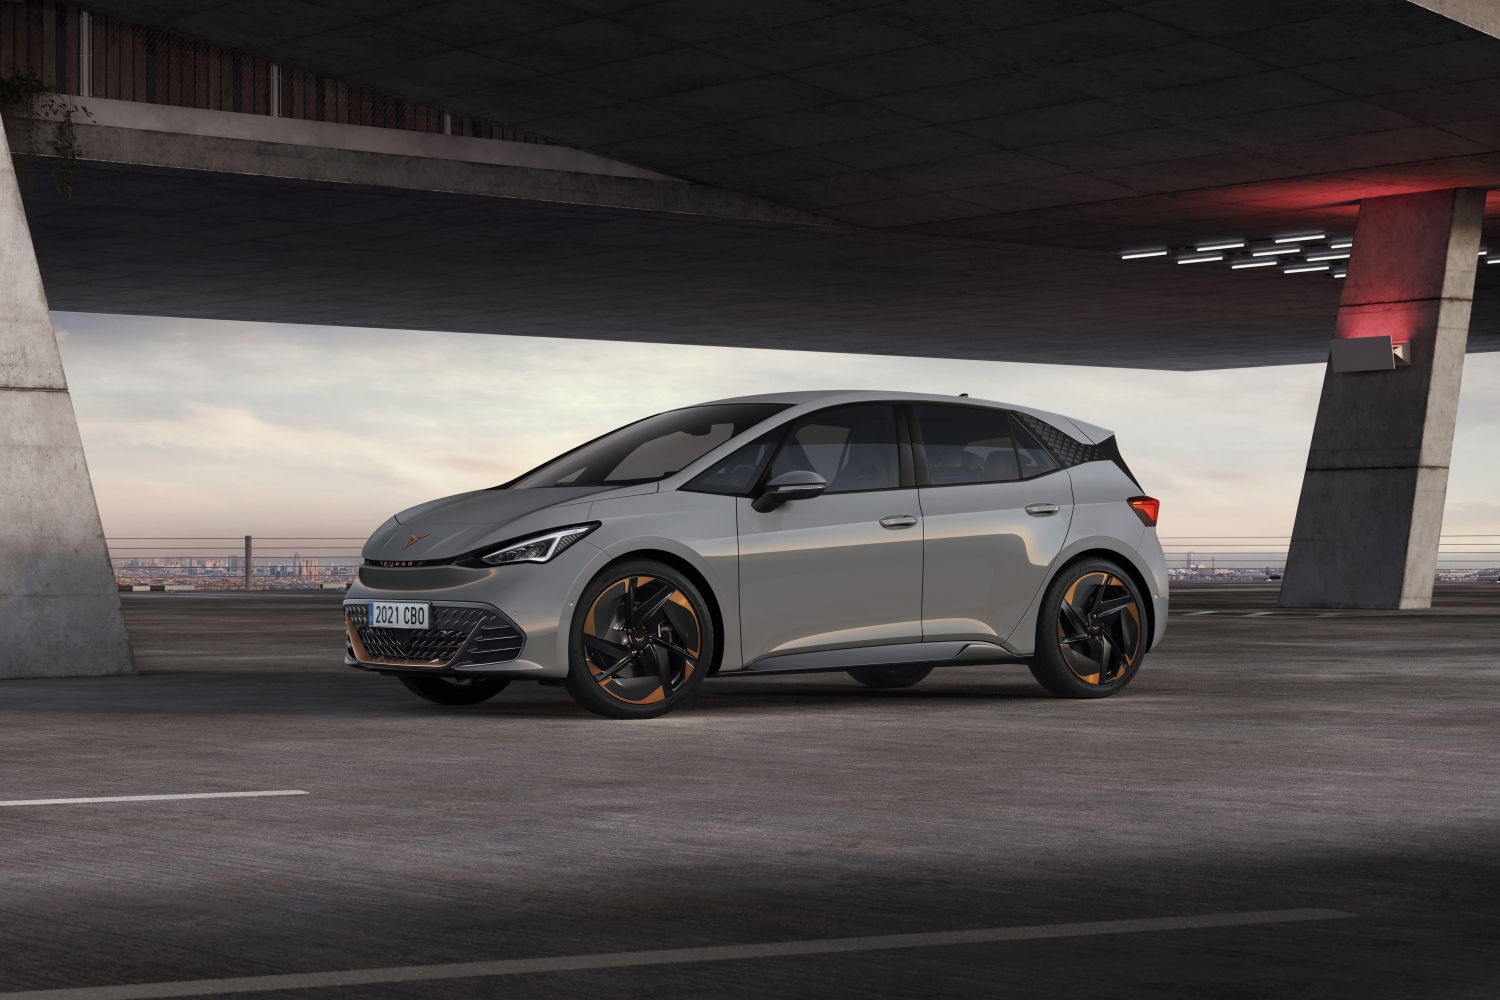 How Cupra an electric hot hatch alternative to the Volkswagen ID.3 | Technica